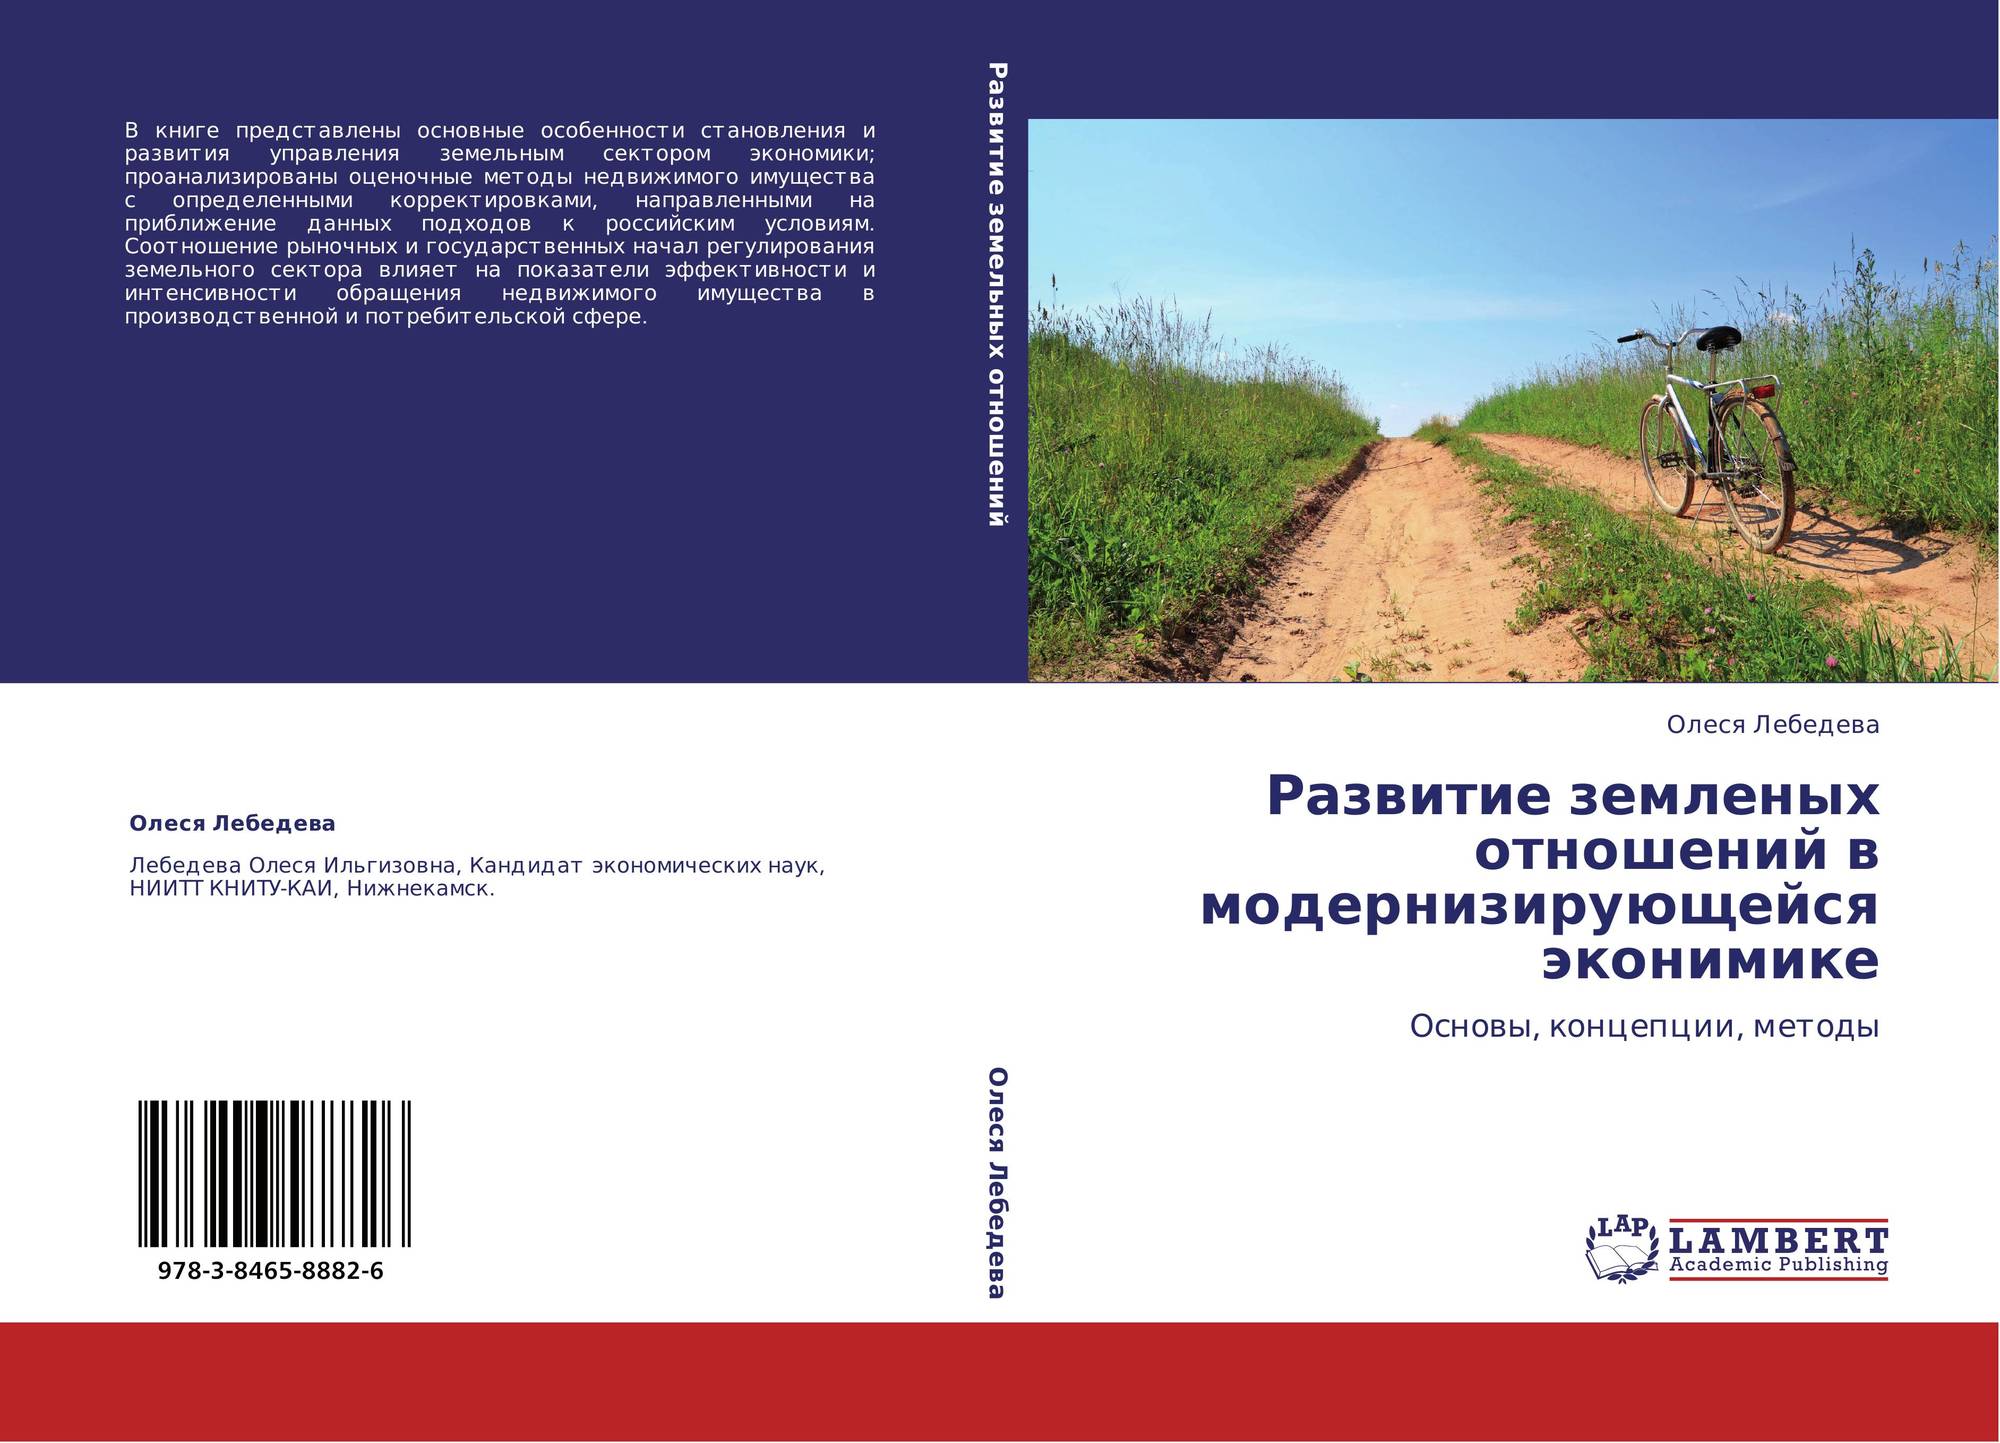 New approach rural Development. На старой Смоленской дороге книга. Significant other обложка. Rural Sociology Cover book. Vast country